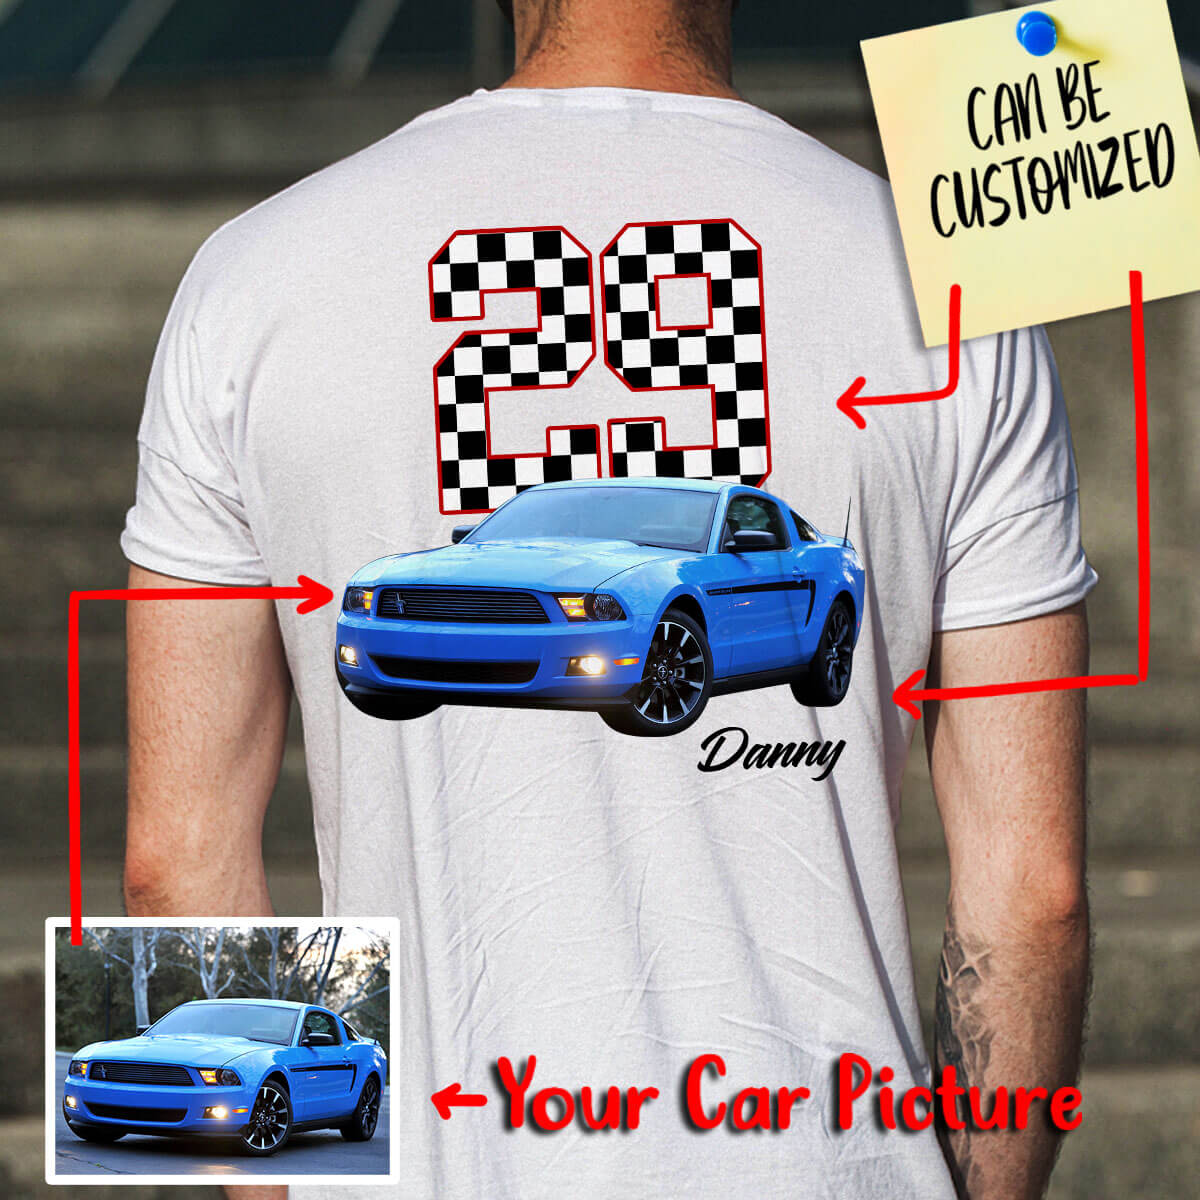 Mustang Art Graphic - Collection Art And StreetKars Customized Fa T-shirt - Mustang